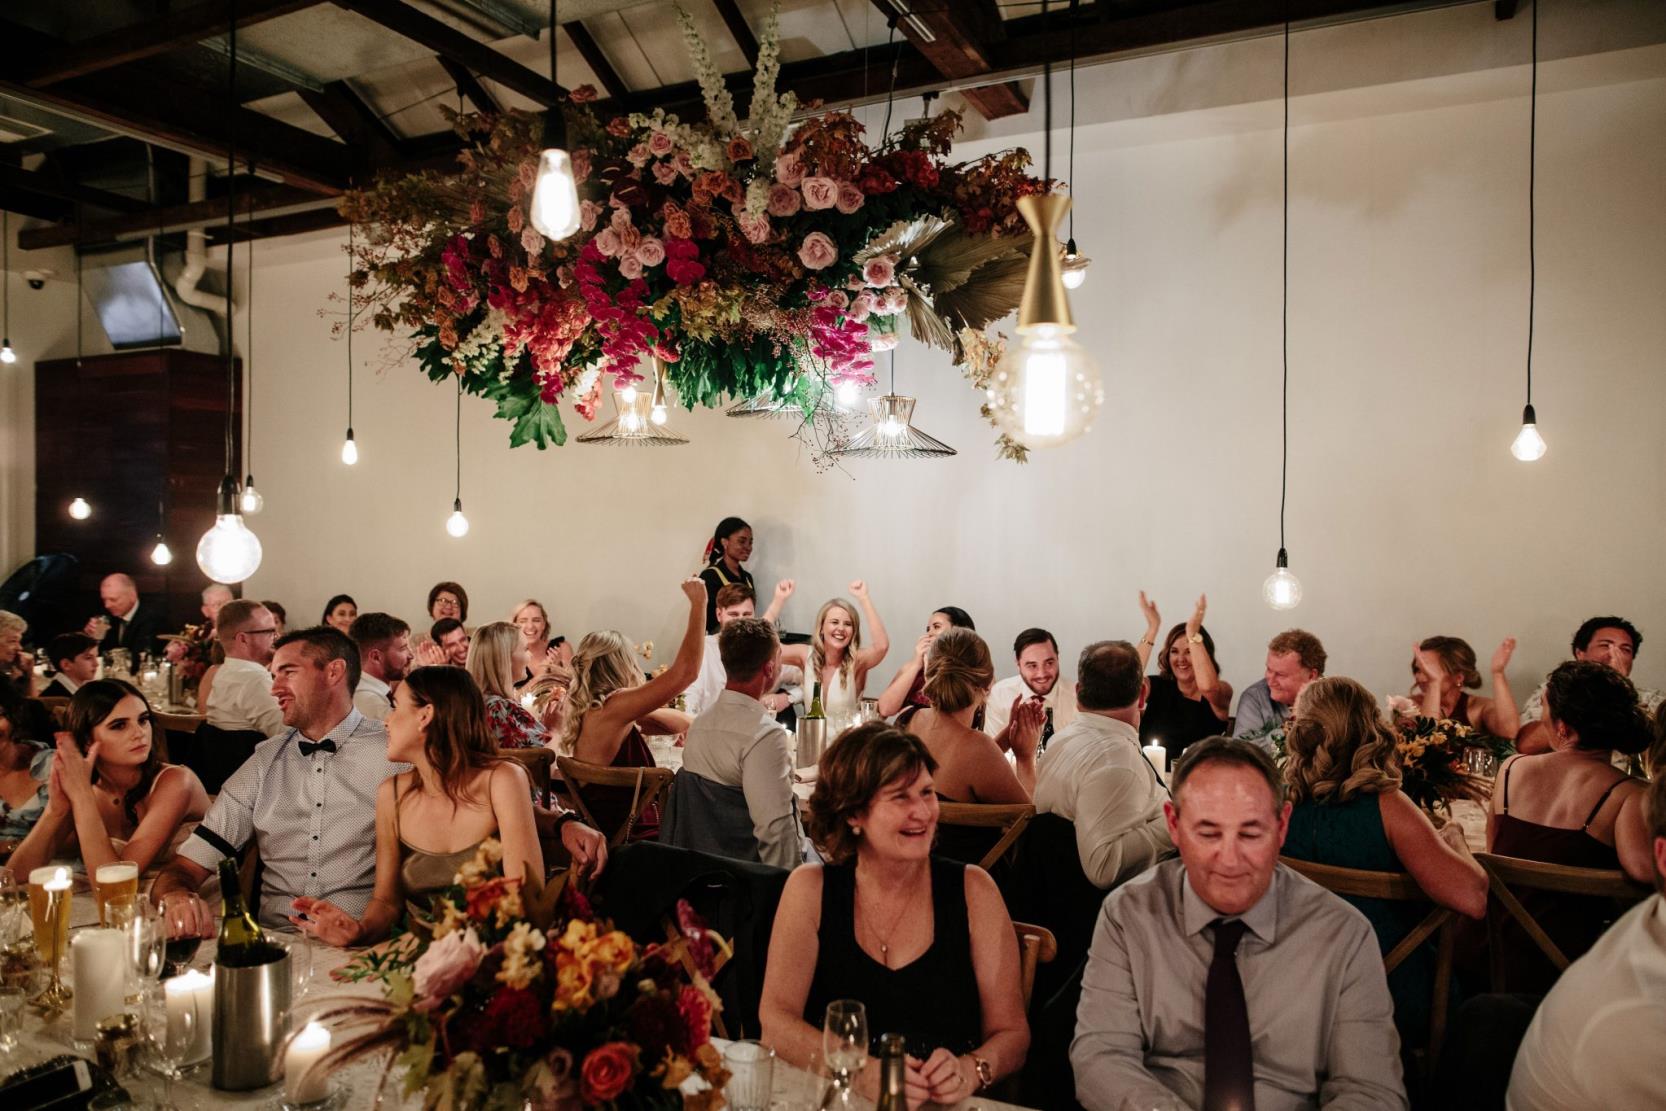 Wedding guests at table with floral centerpiece hanging from roof